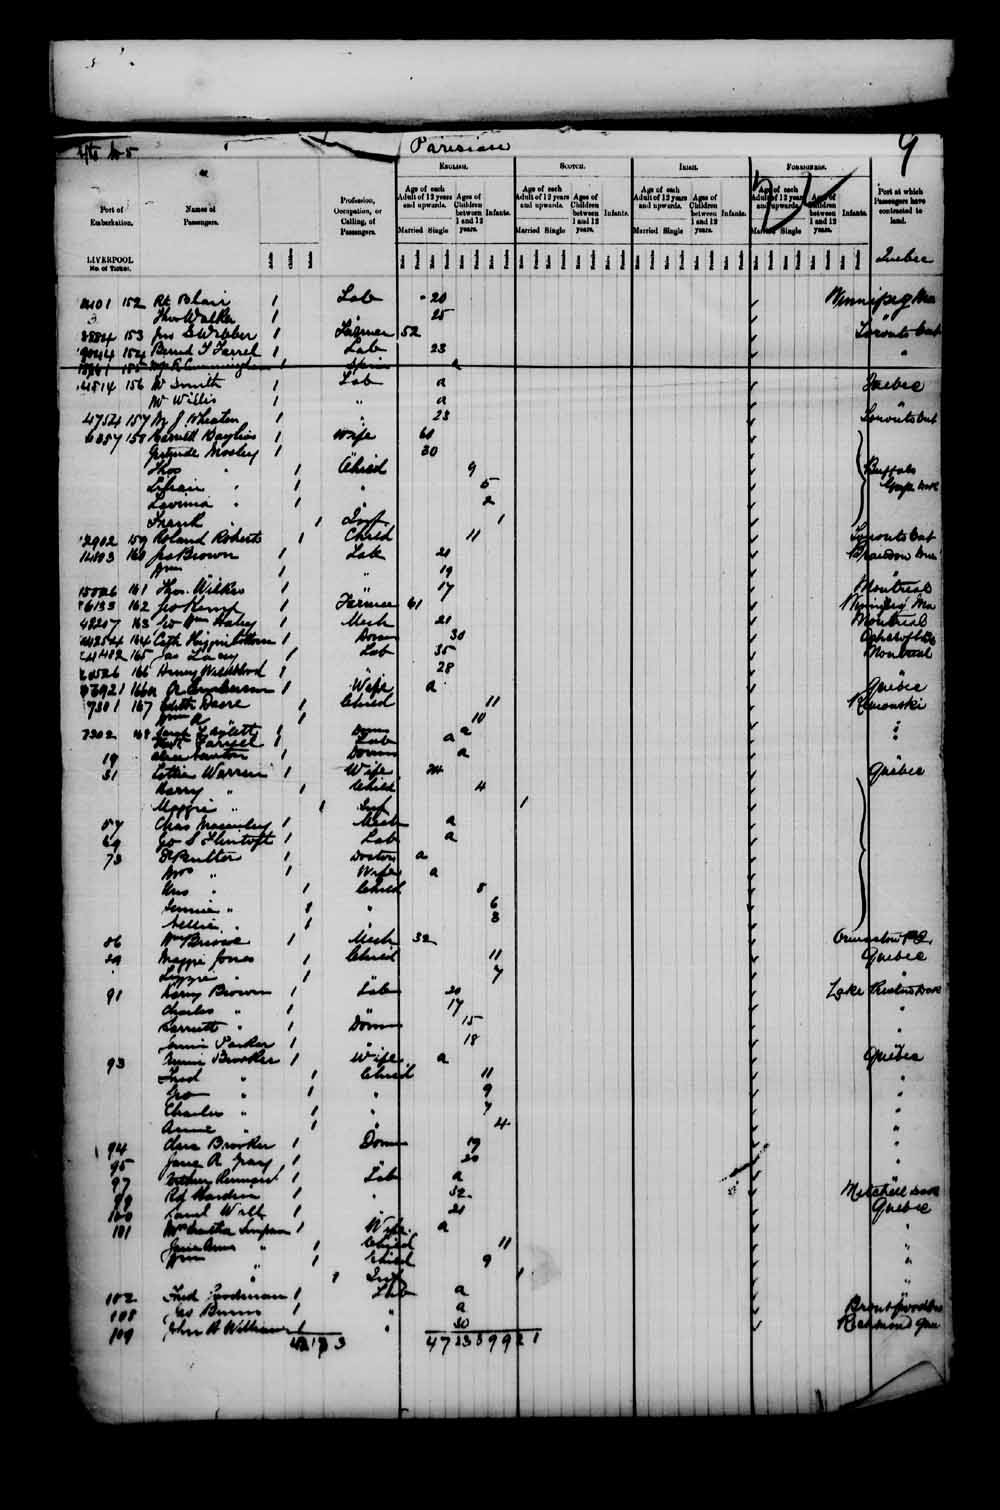 Digitized page of Passenger Lists for Image No.: e003549672